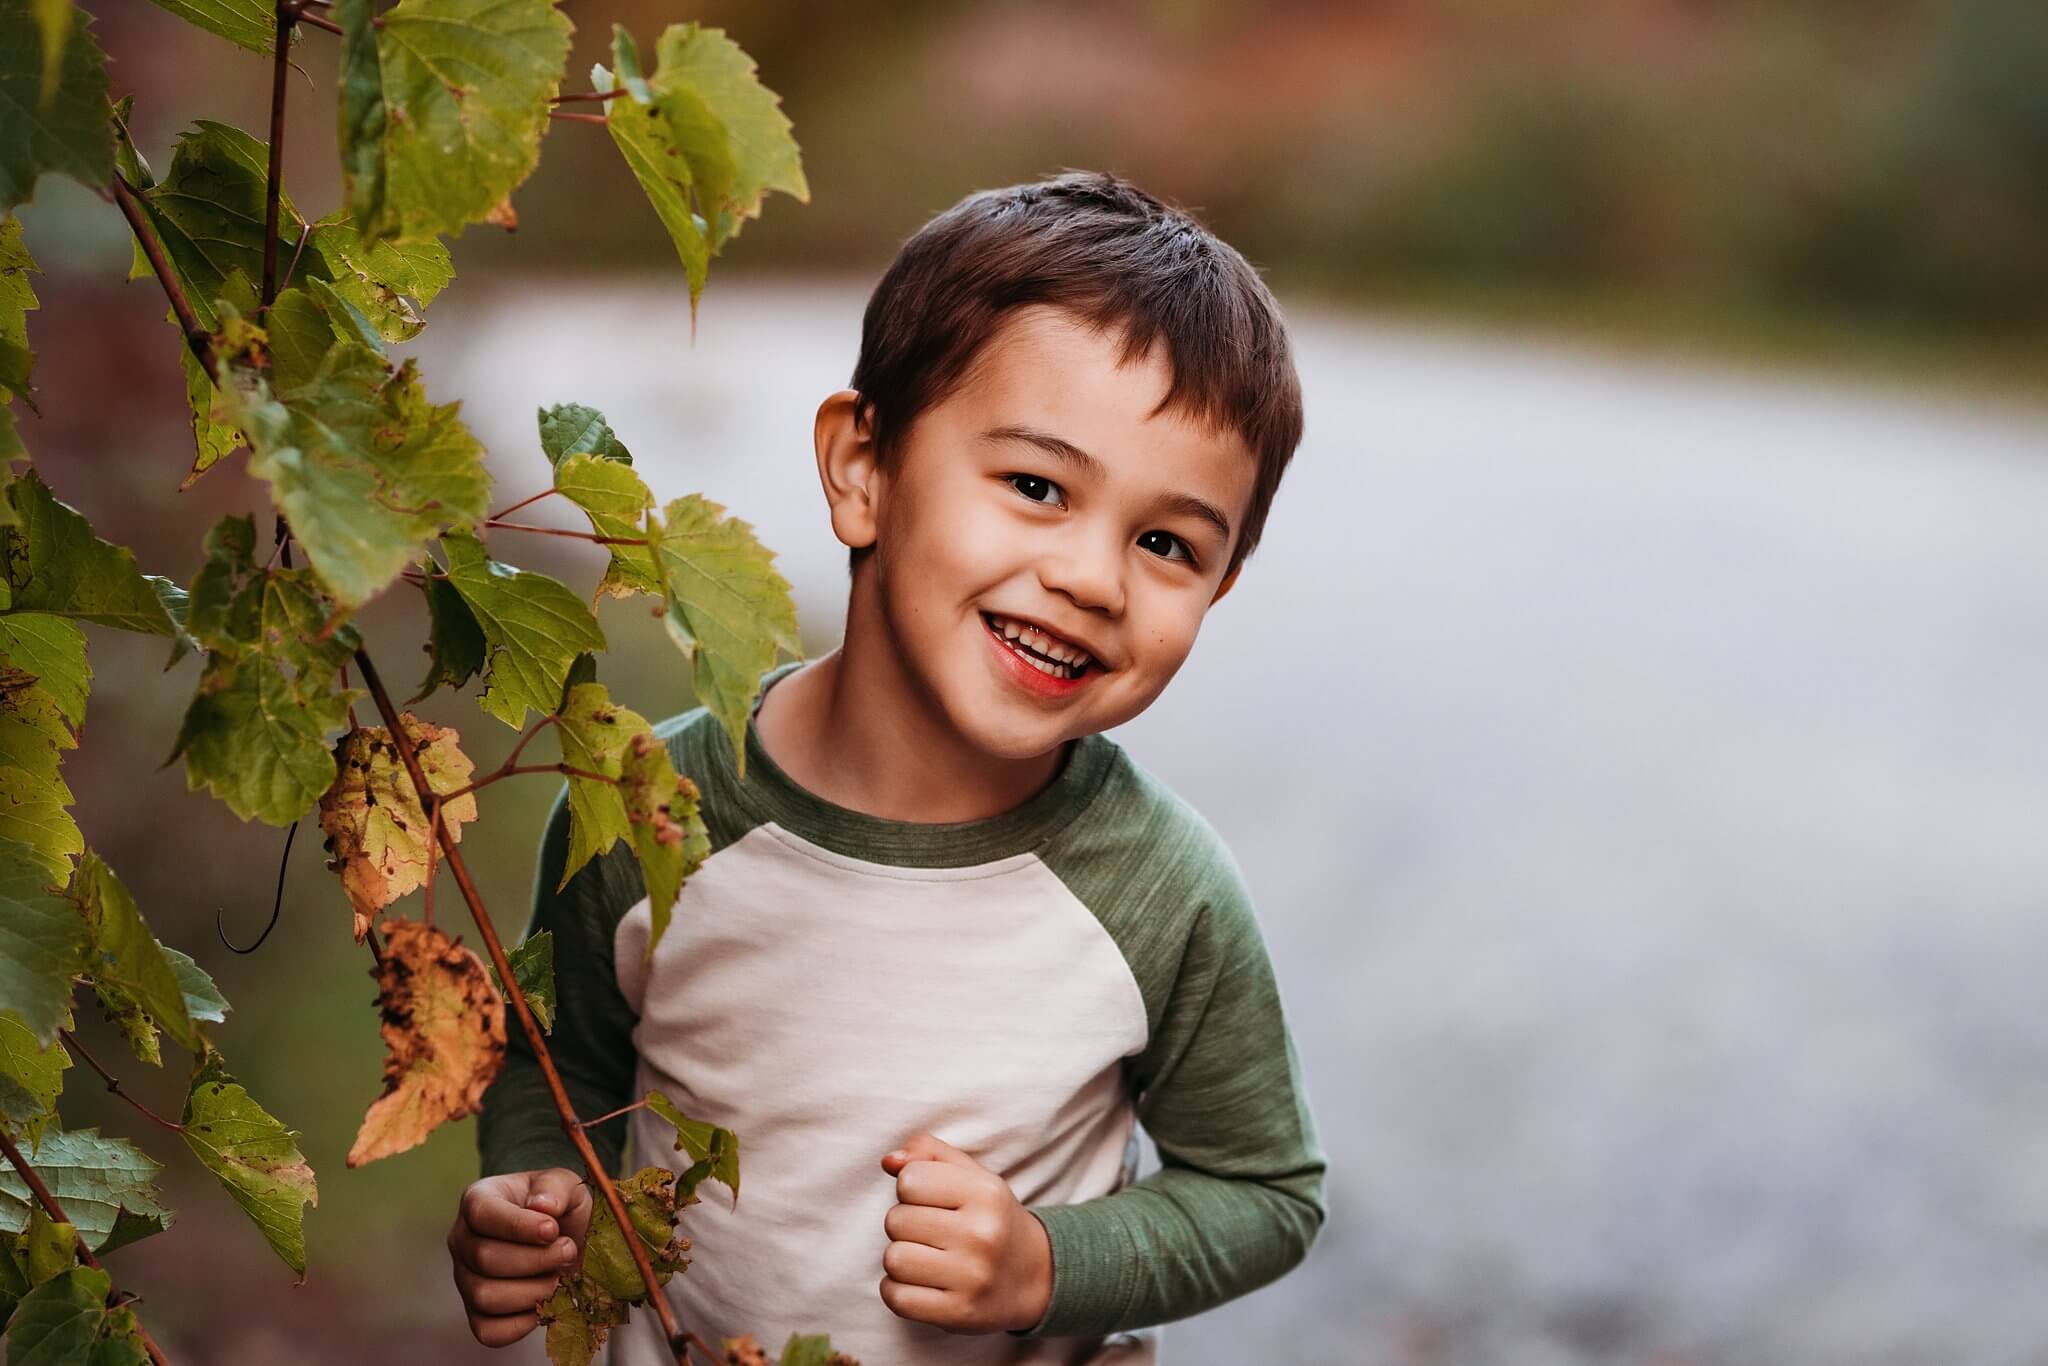 Little boy peeks out from behind some vines with a huge grin